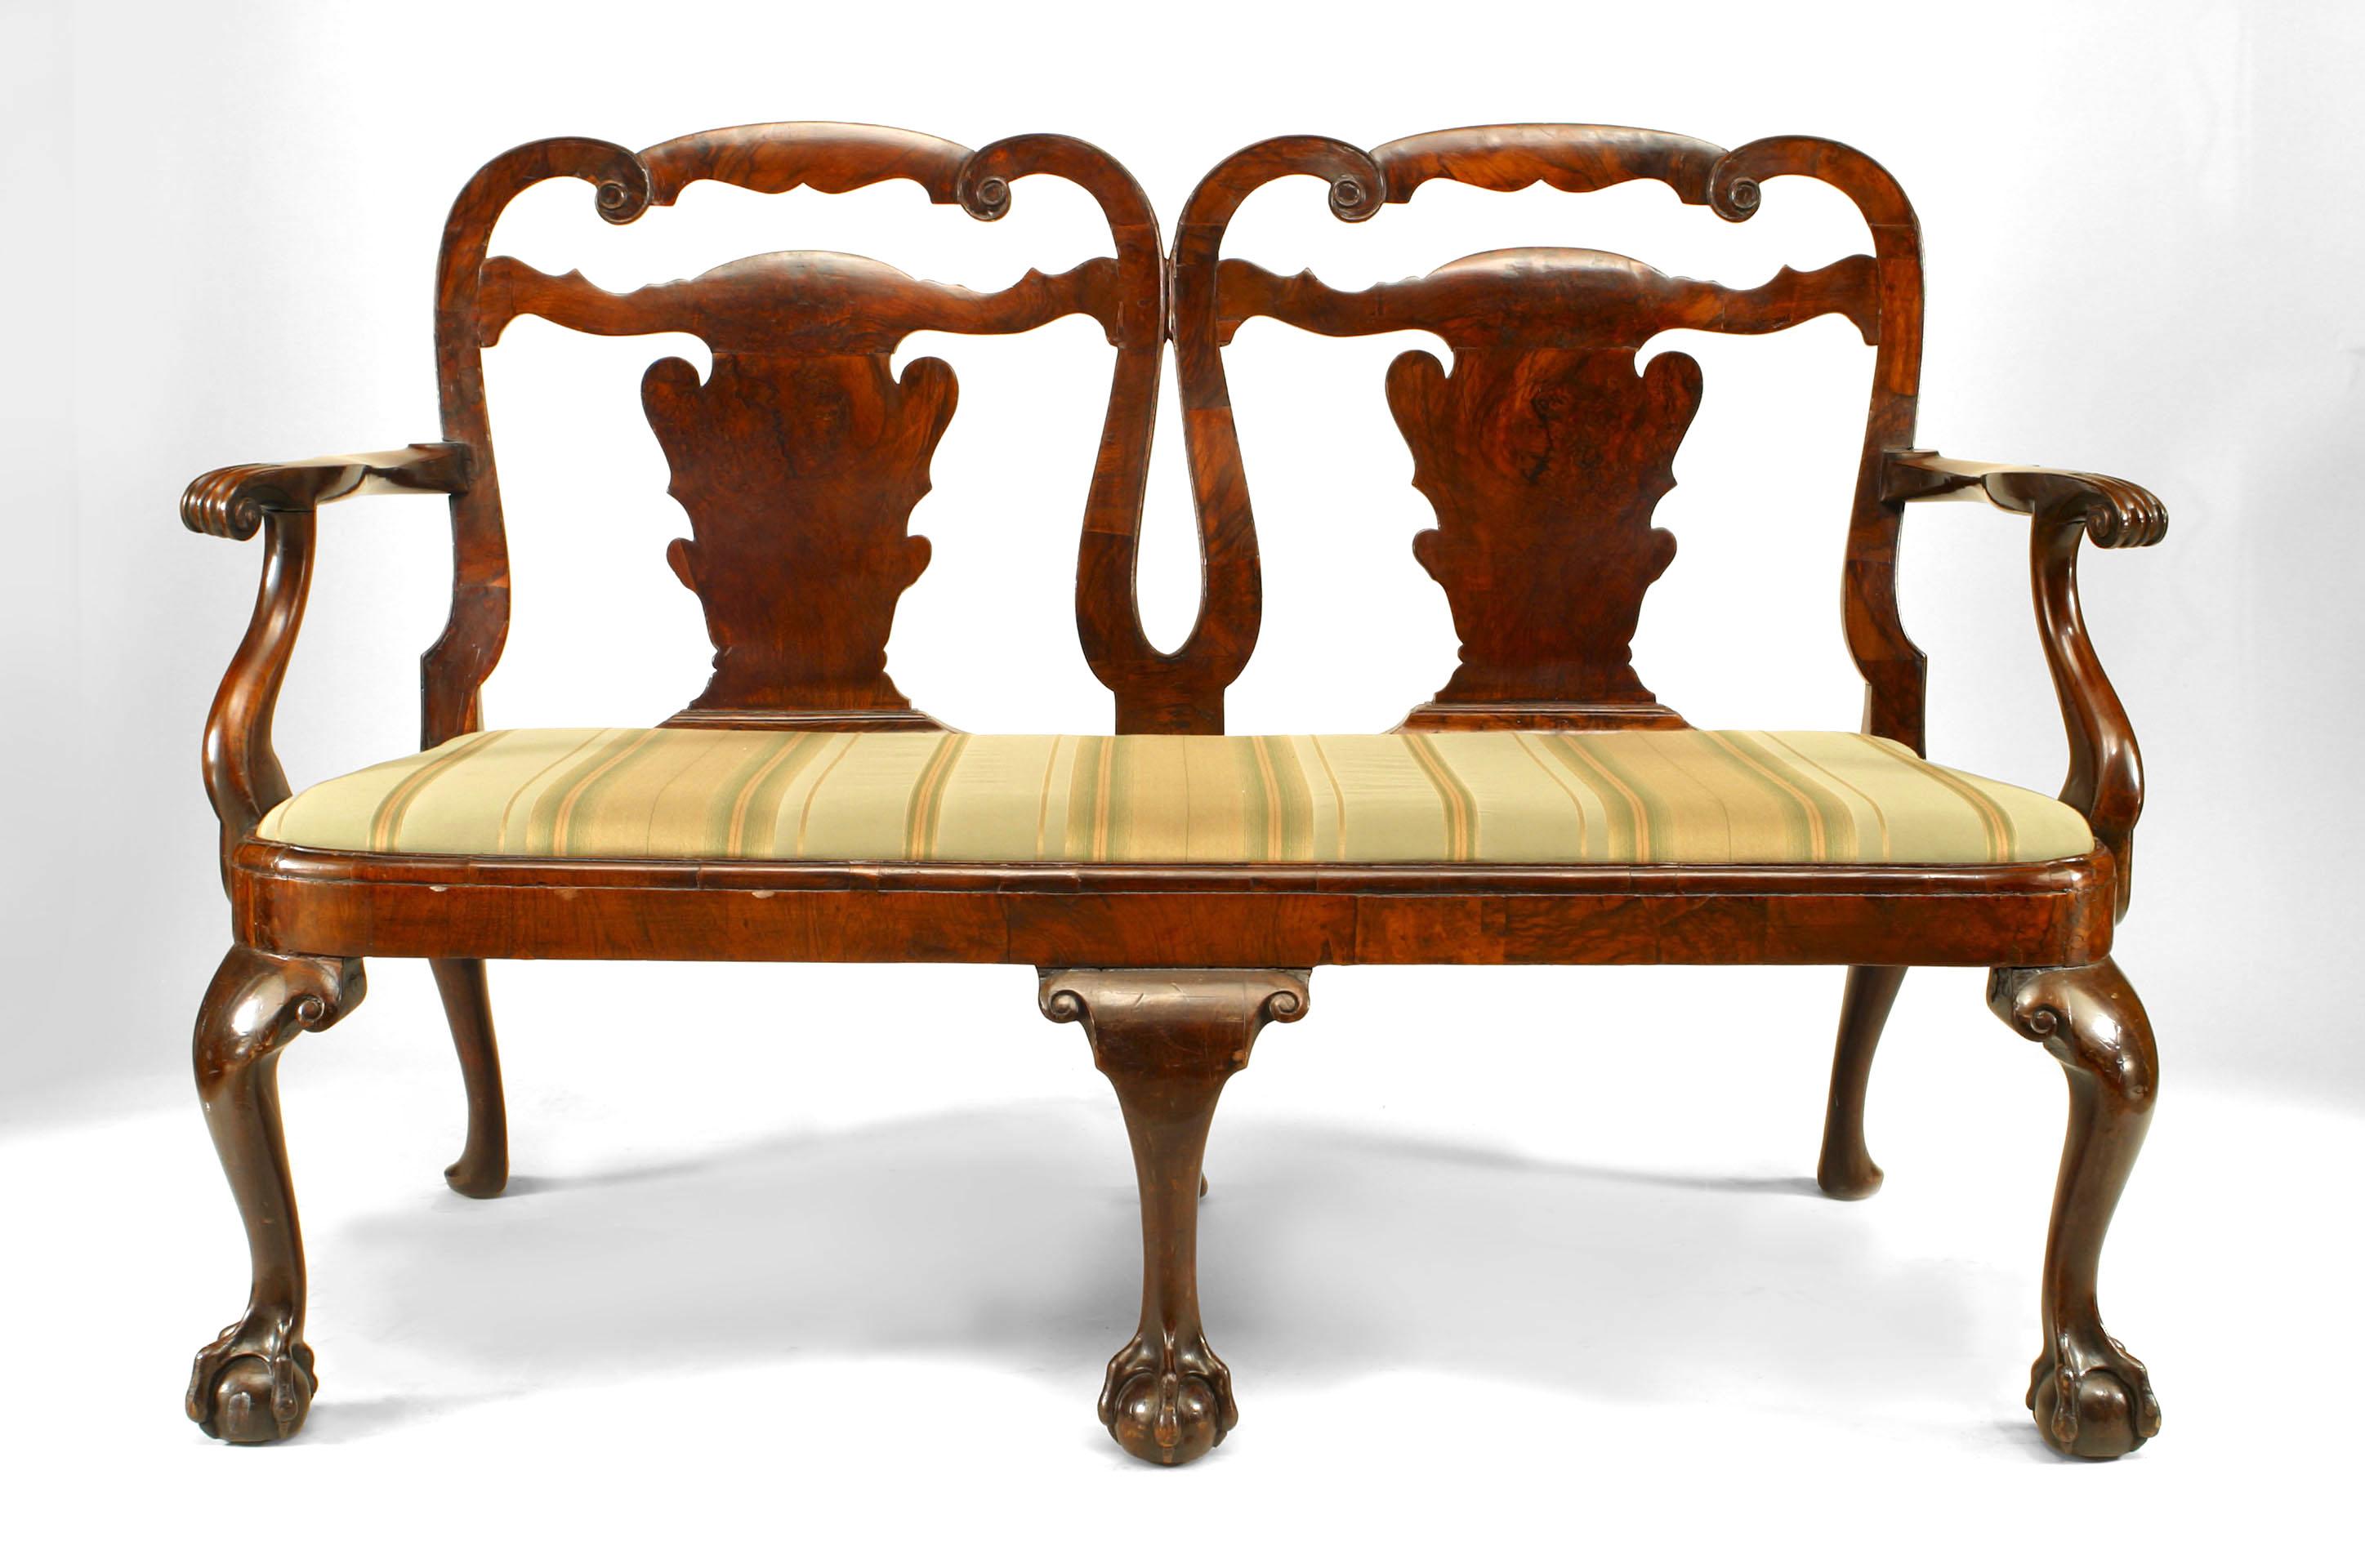 English Chippendale style (18/19th Cent) mahogany double chair back loveseat with splat design and velvet seat.
